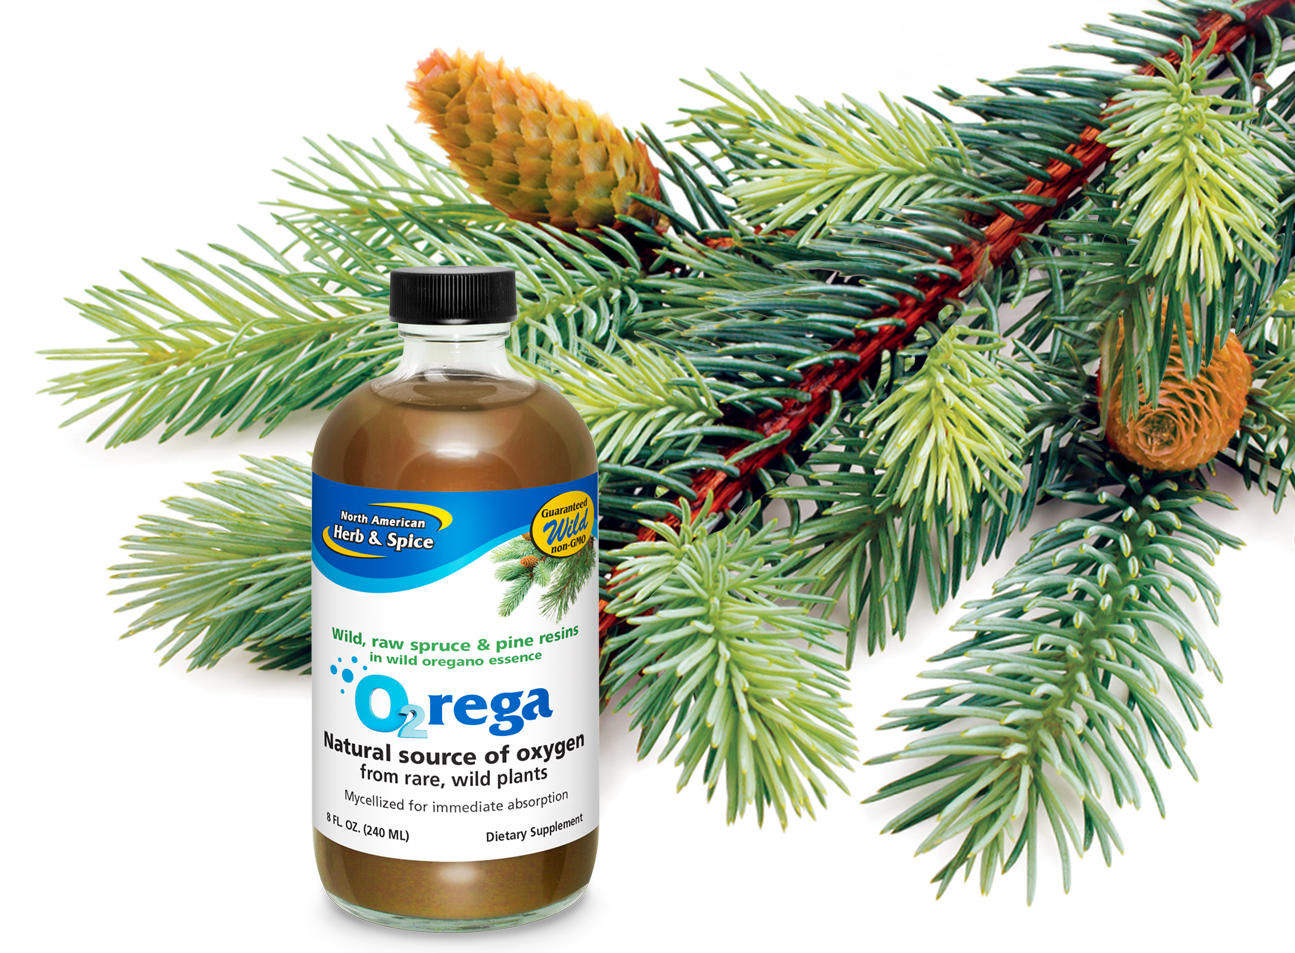 O2rega product with spruce ingredient